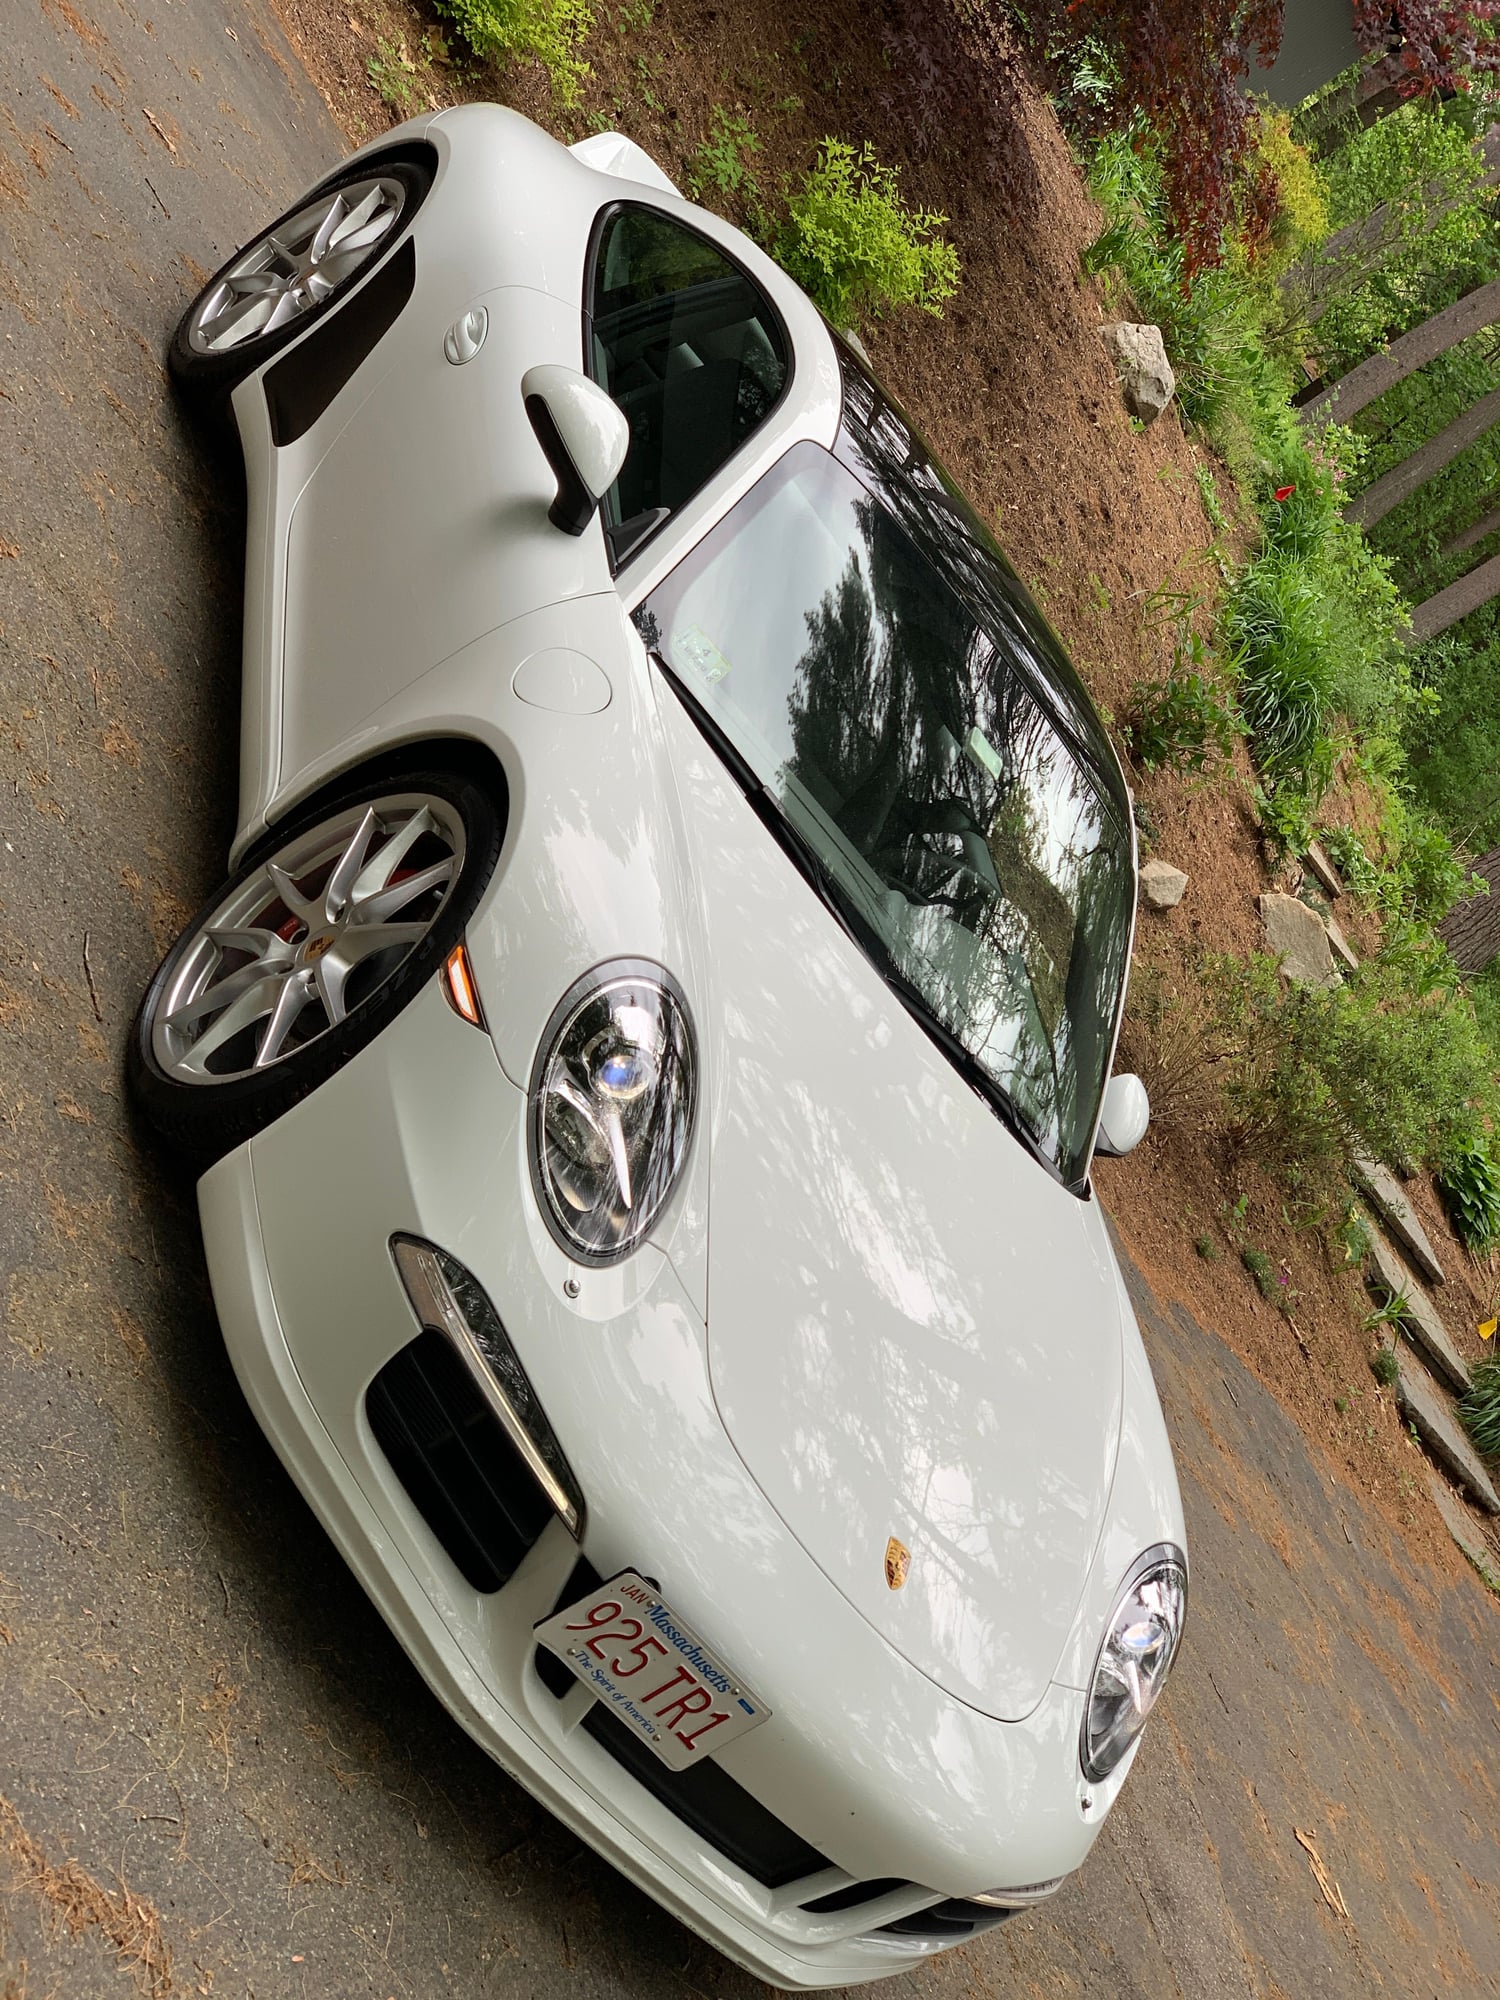 2013 Porsche 911 - 2013 911 C2S Manual, White w/Sport Kit Too! All New Rubber! WITH PICS NOW!!! - Used - VIN WPOAB2A96DS123240 - 24,000 Miles - 6 cyl - 2WD - Manual - Coupe - White - Concord, MA 01742, United States